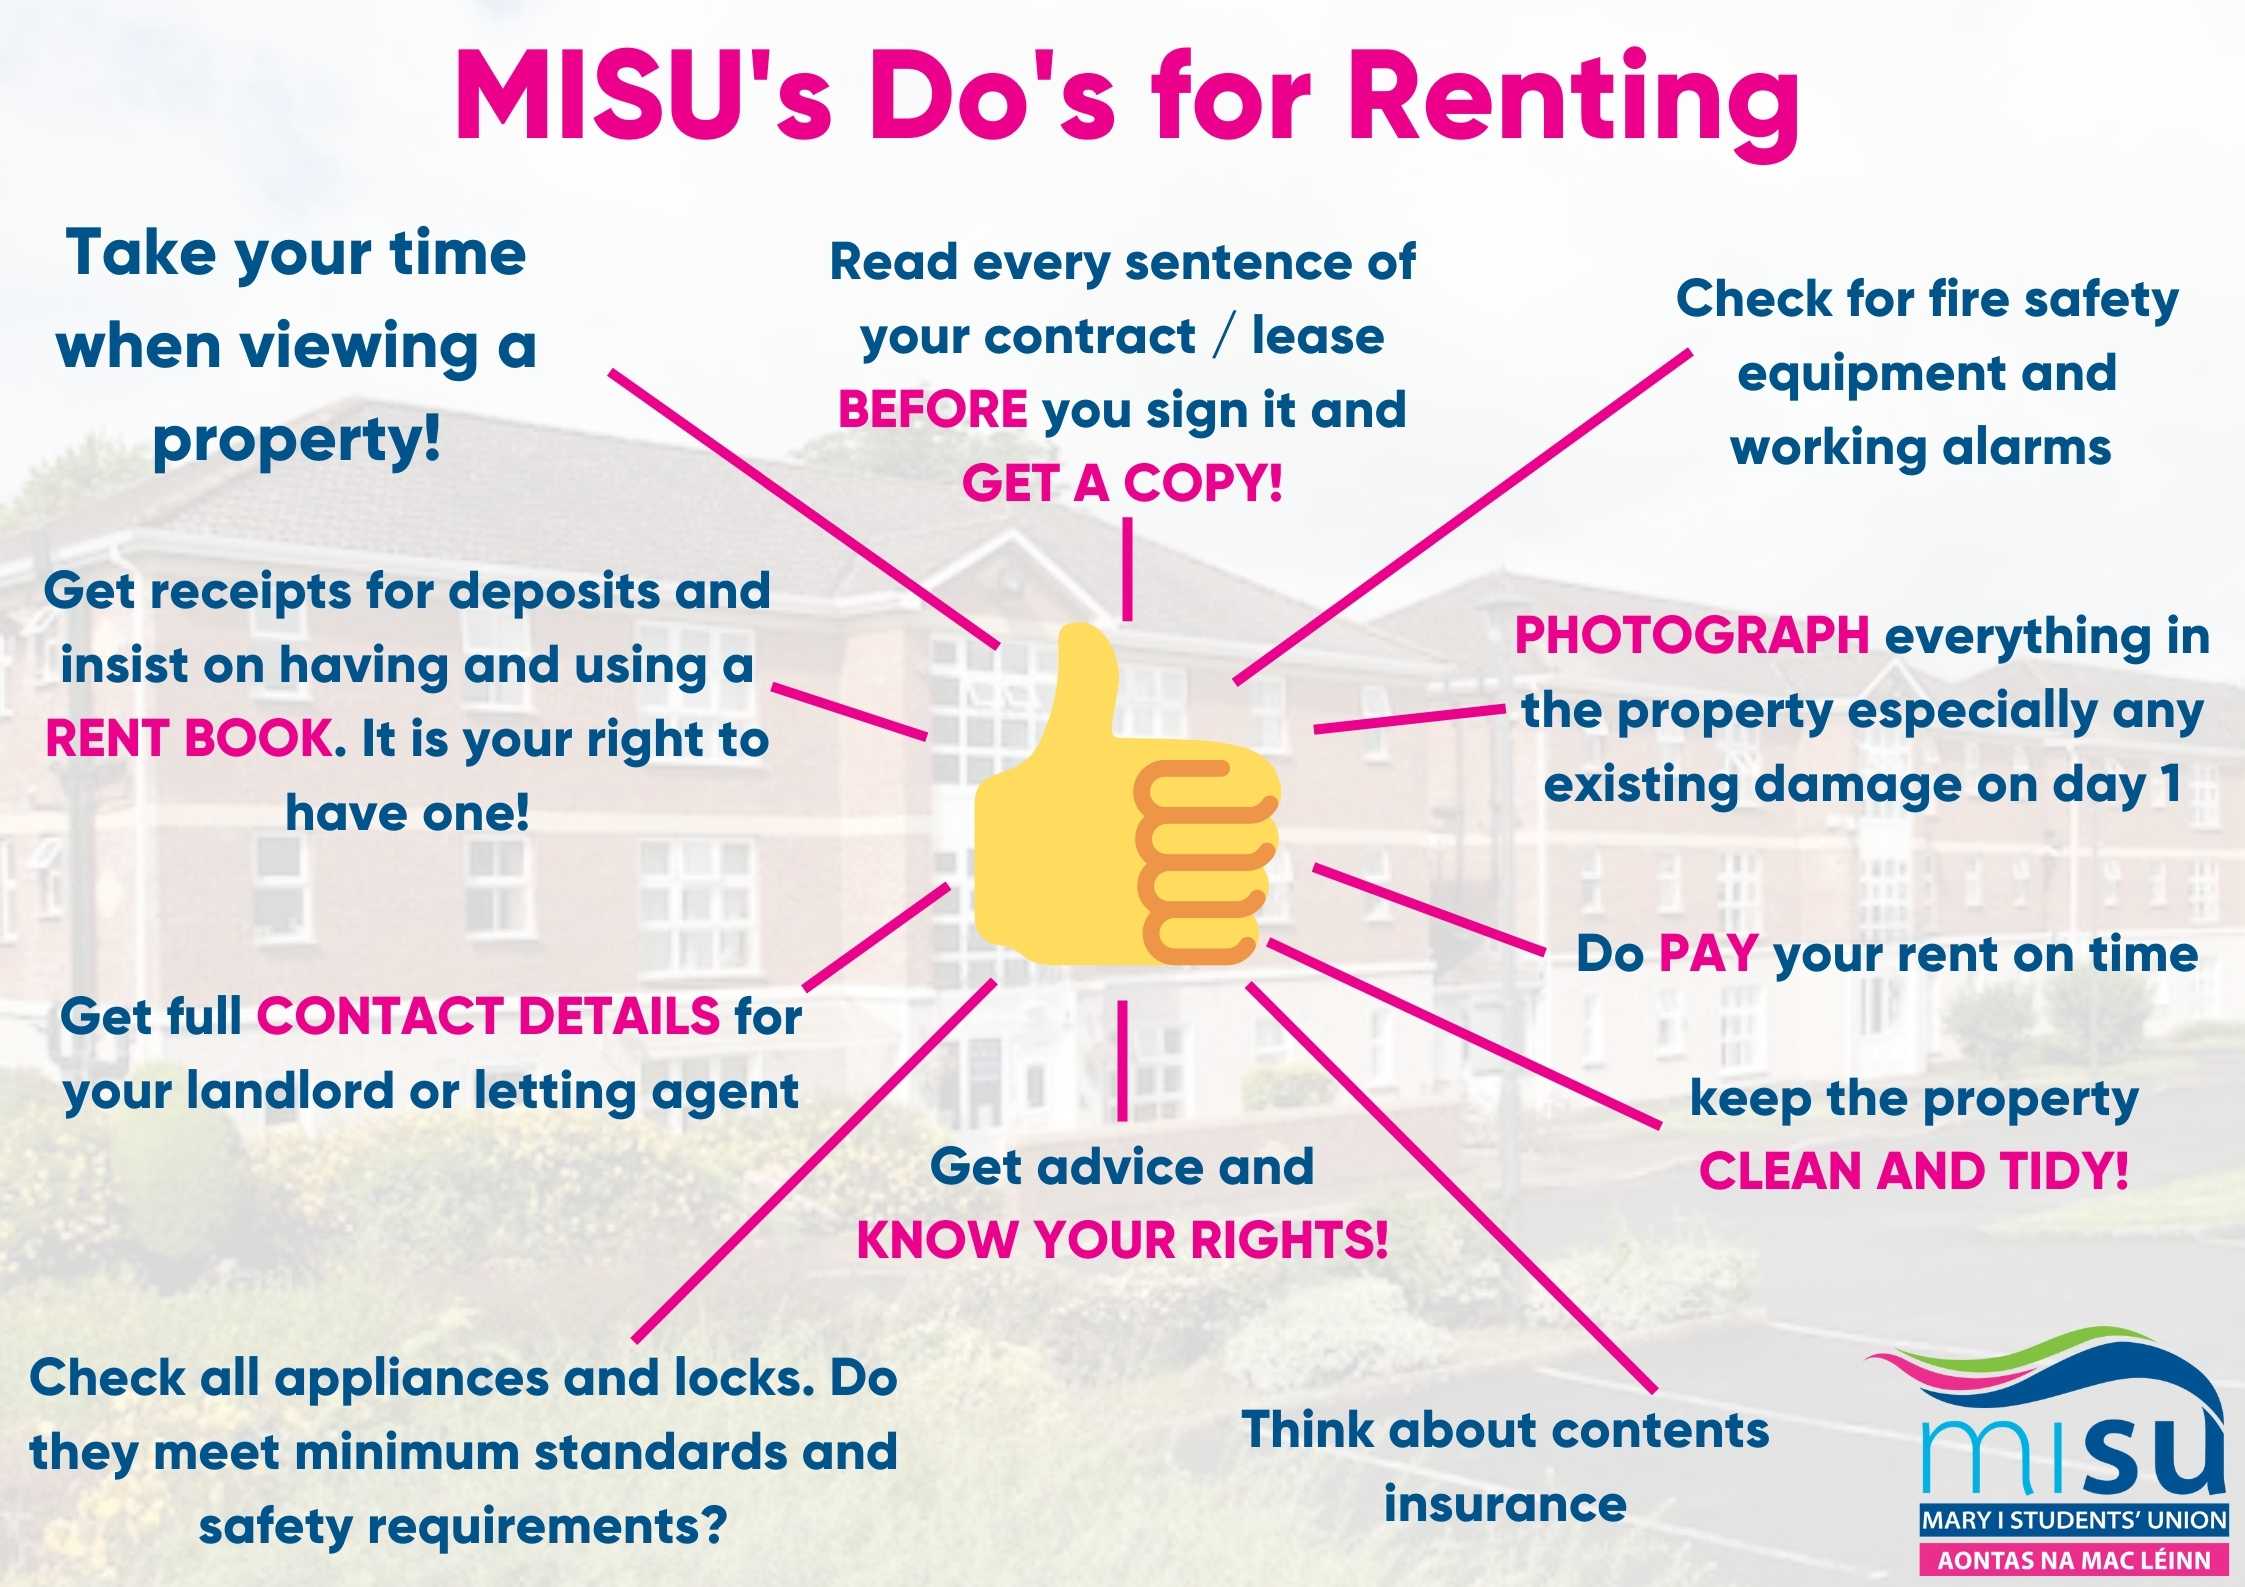 MISUs Dos for Renting